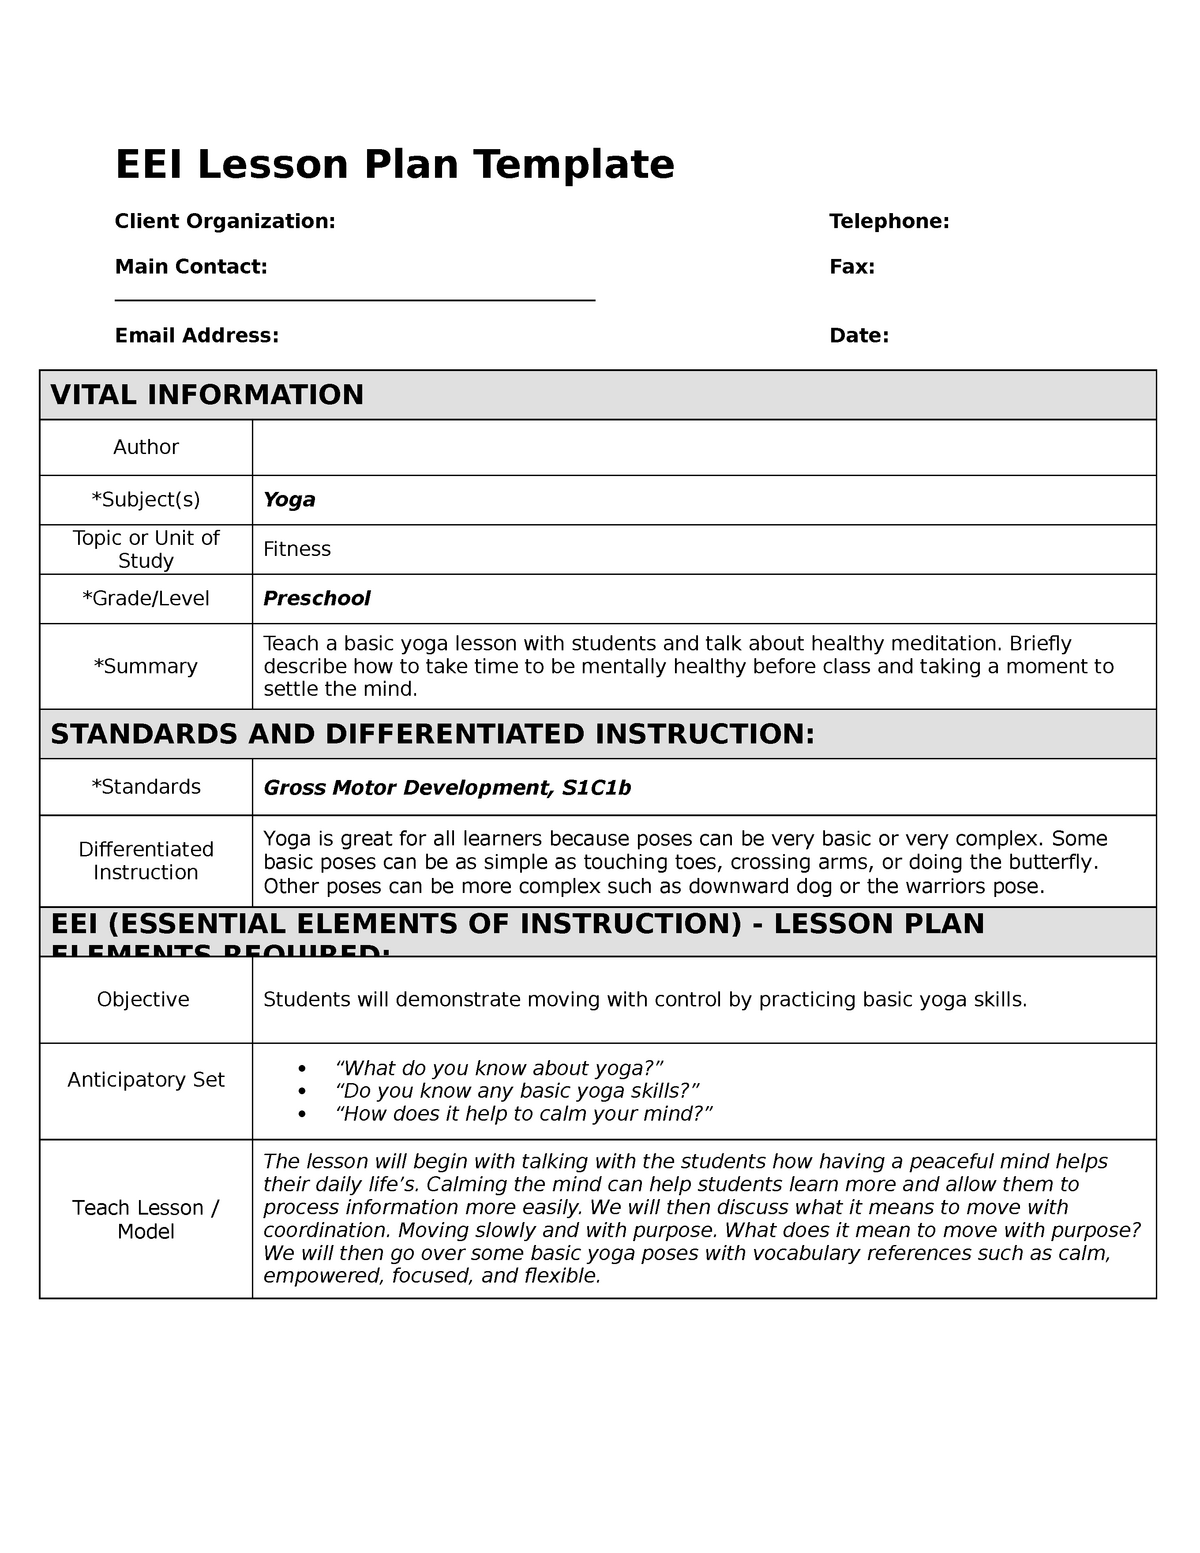 Differentiated Instruction Lesson Plan Template from d20ohkaloyme4g.cloudfront.net